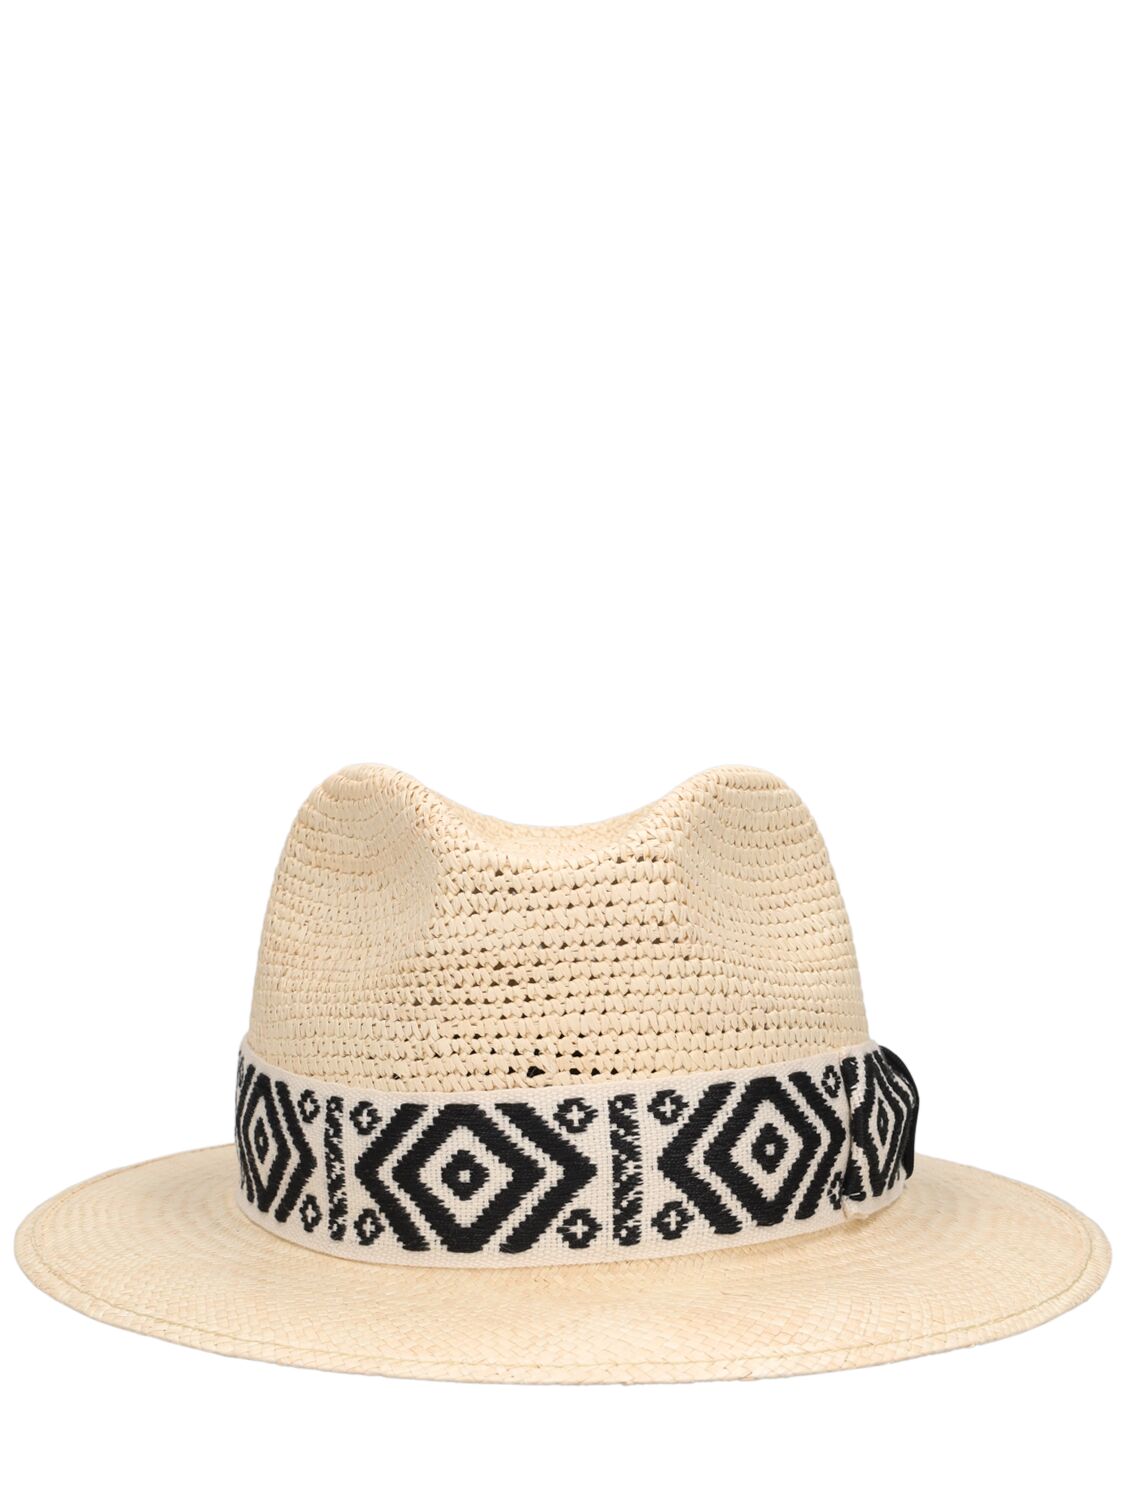 Image of Country Straw Panama Hat